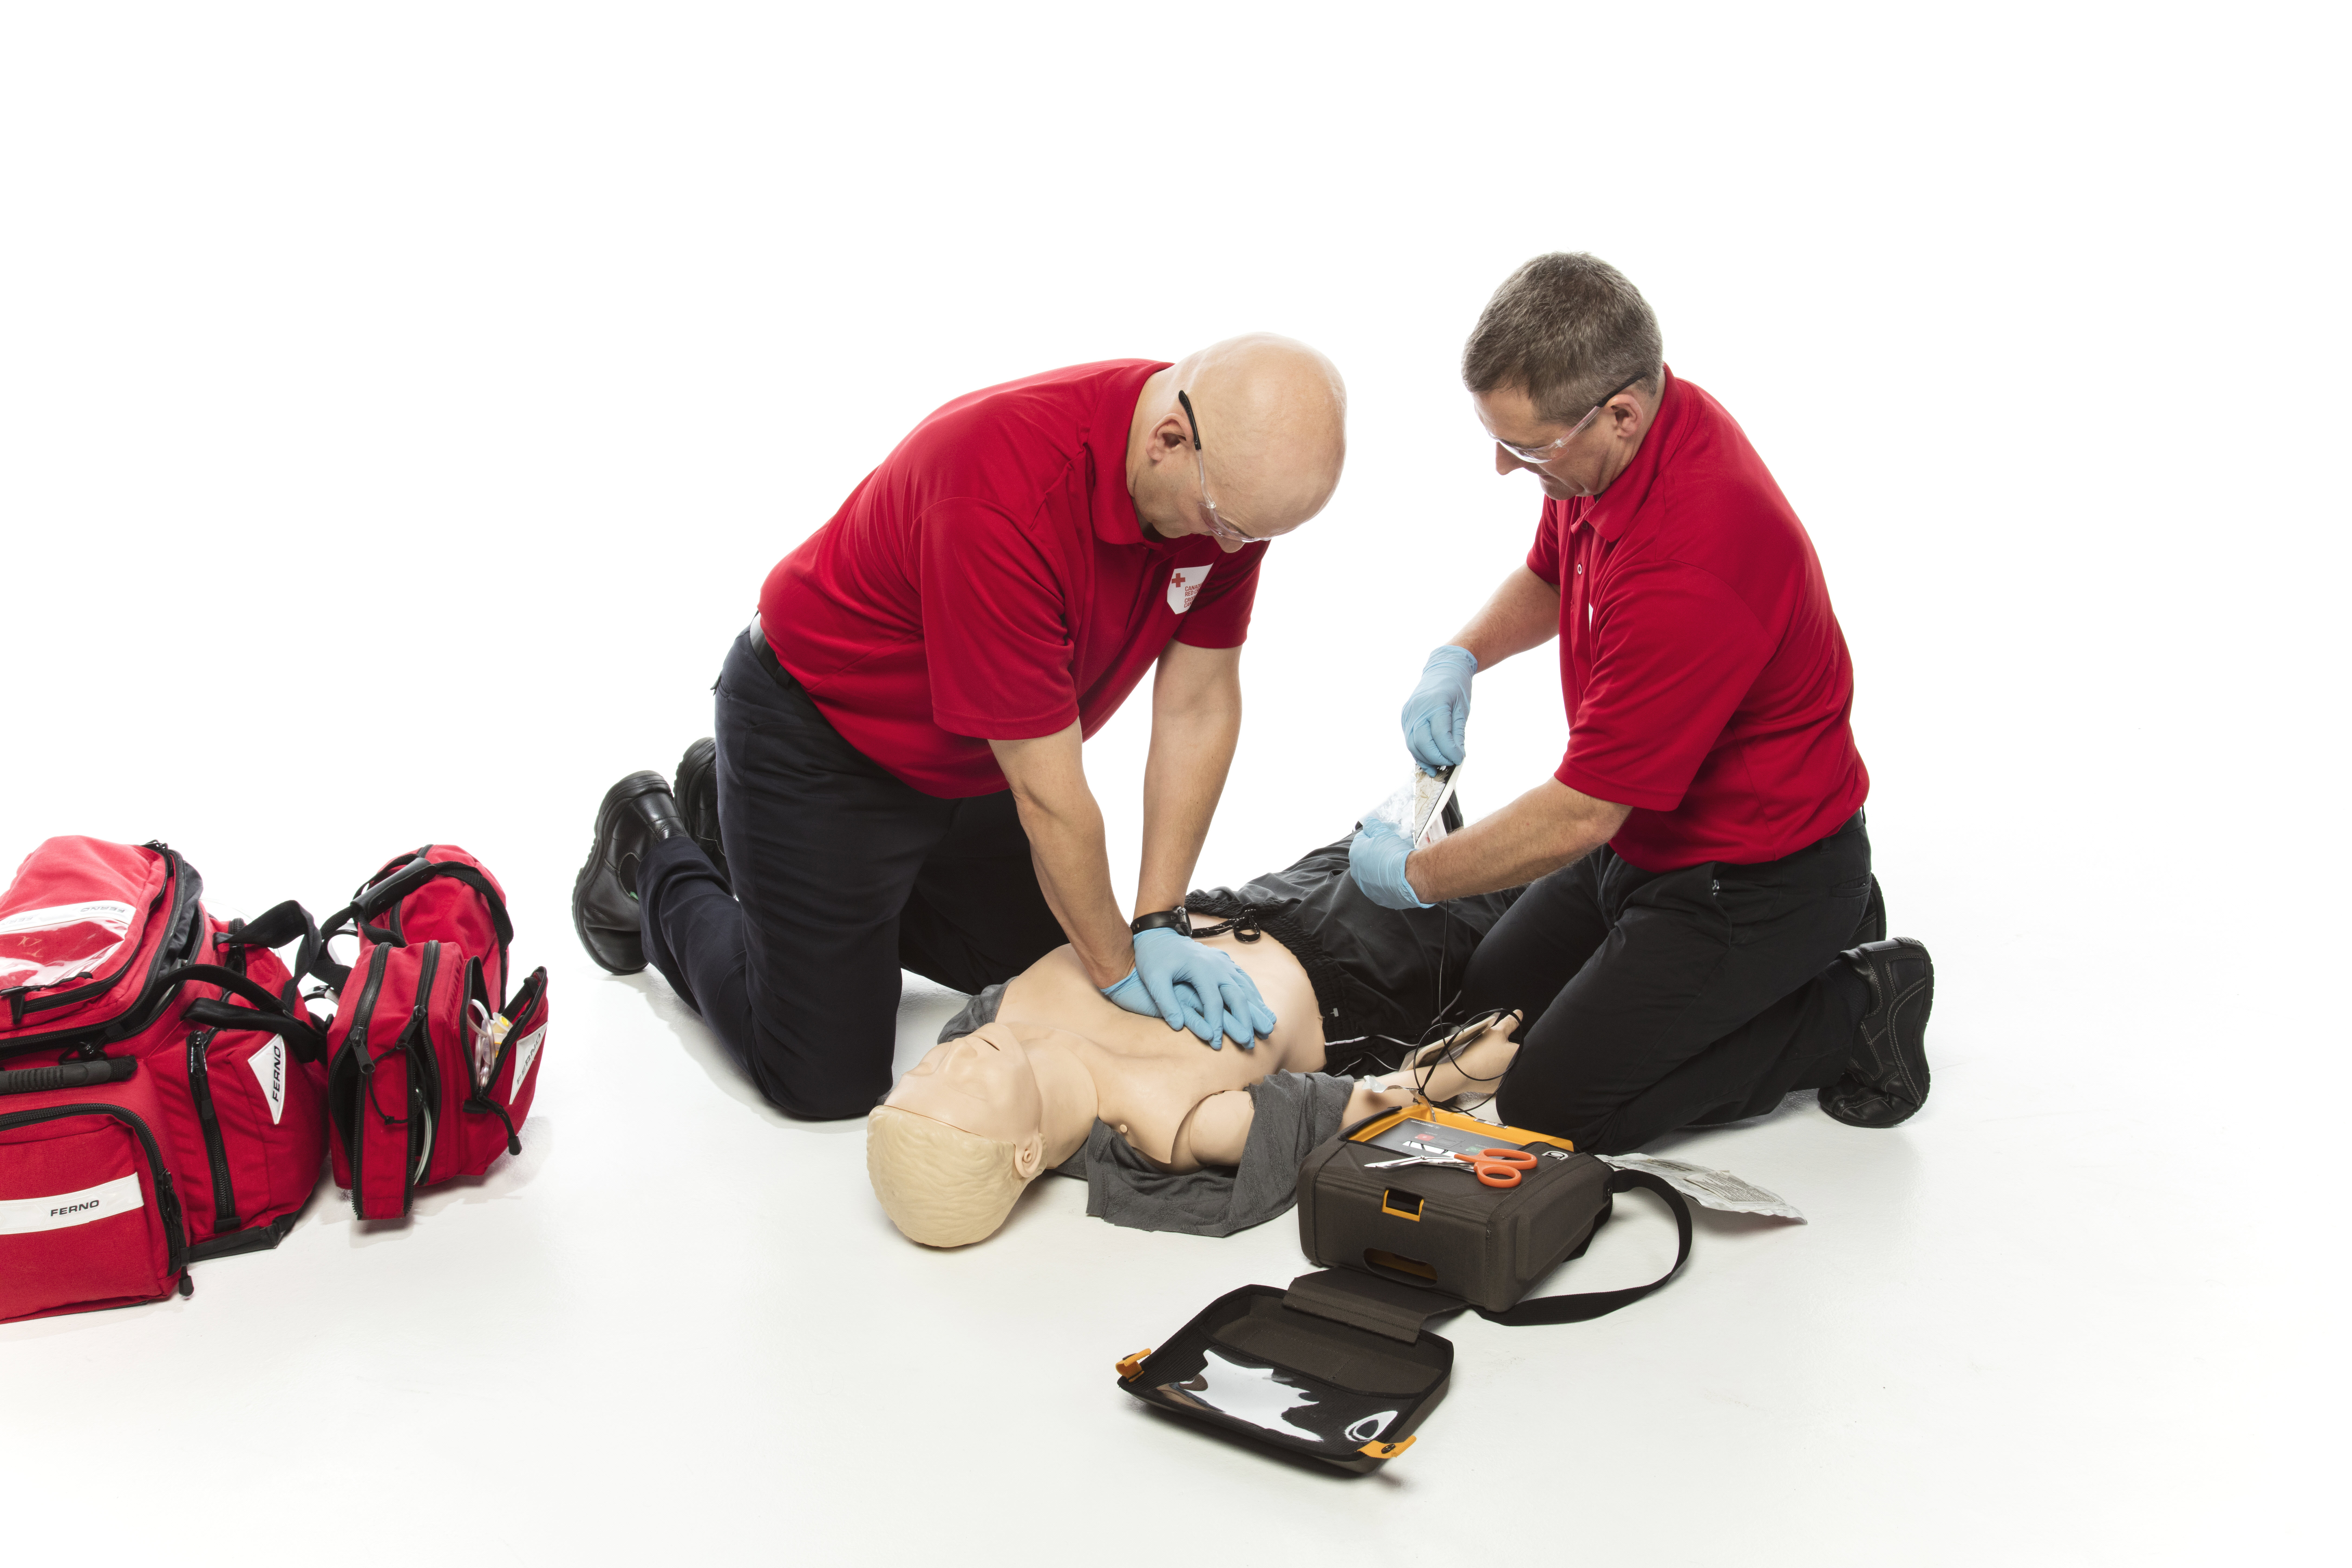 First Aid Course: Basic Life Support Vancouver